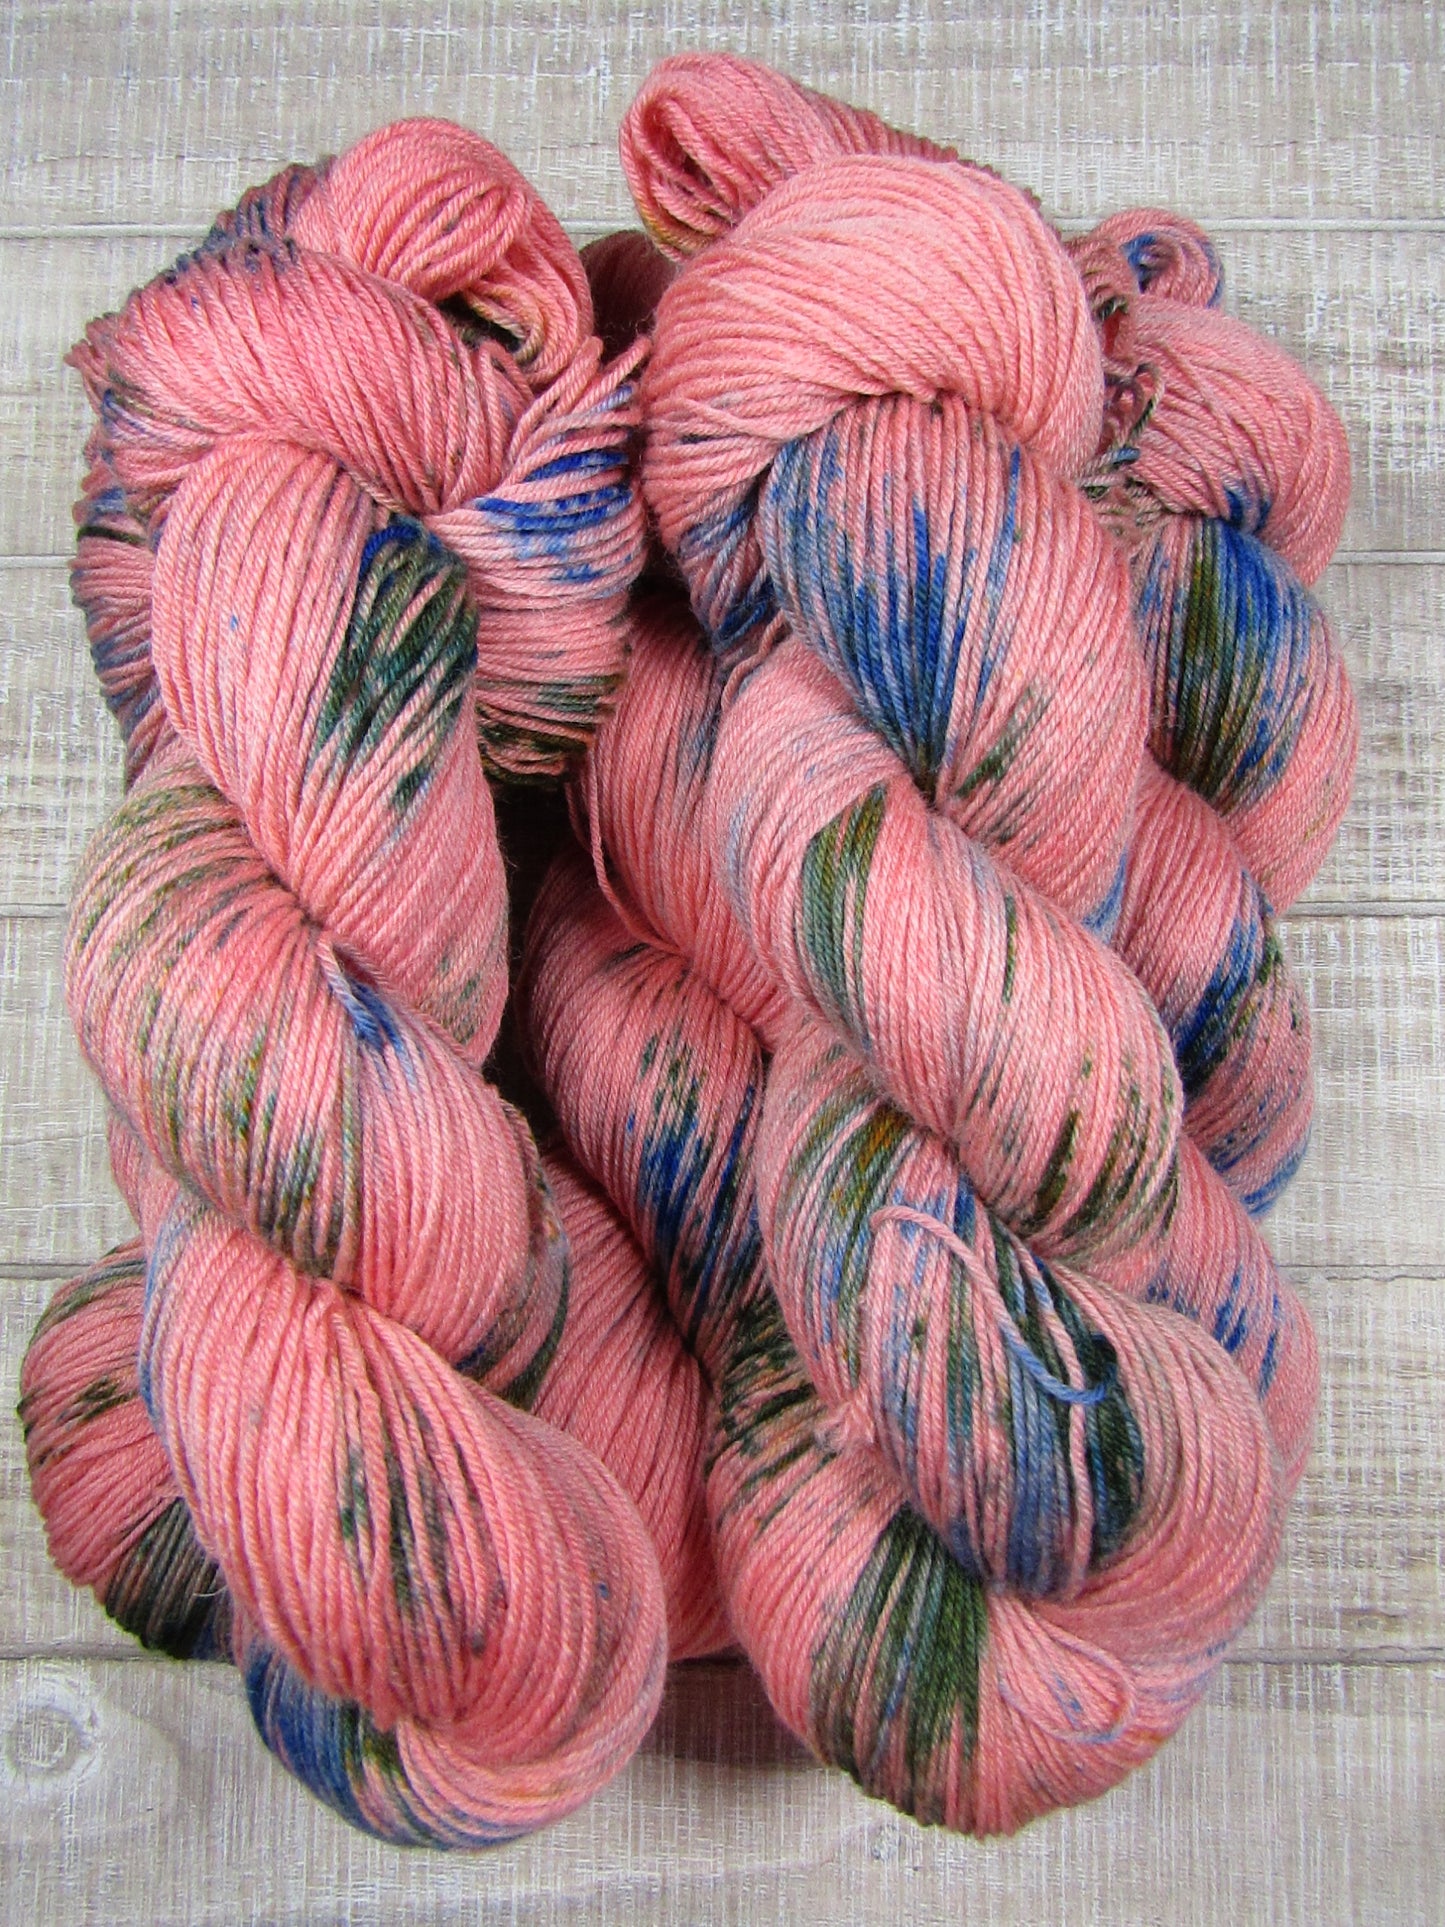 Hand-Dyed Yarn Camille is russet yarn with areas of brilliant blue and avocado green.